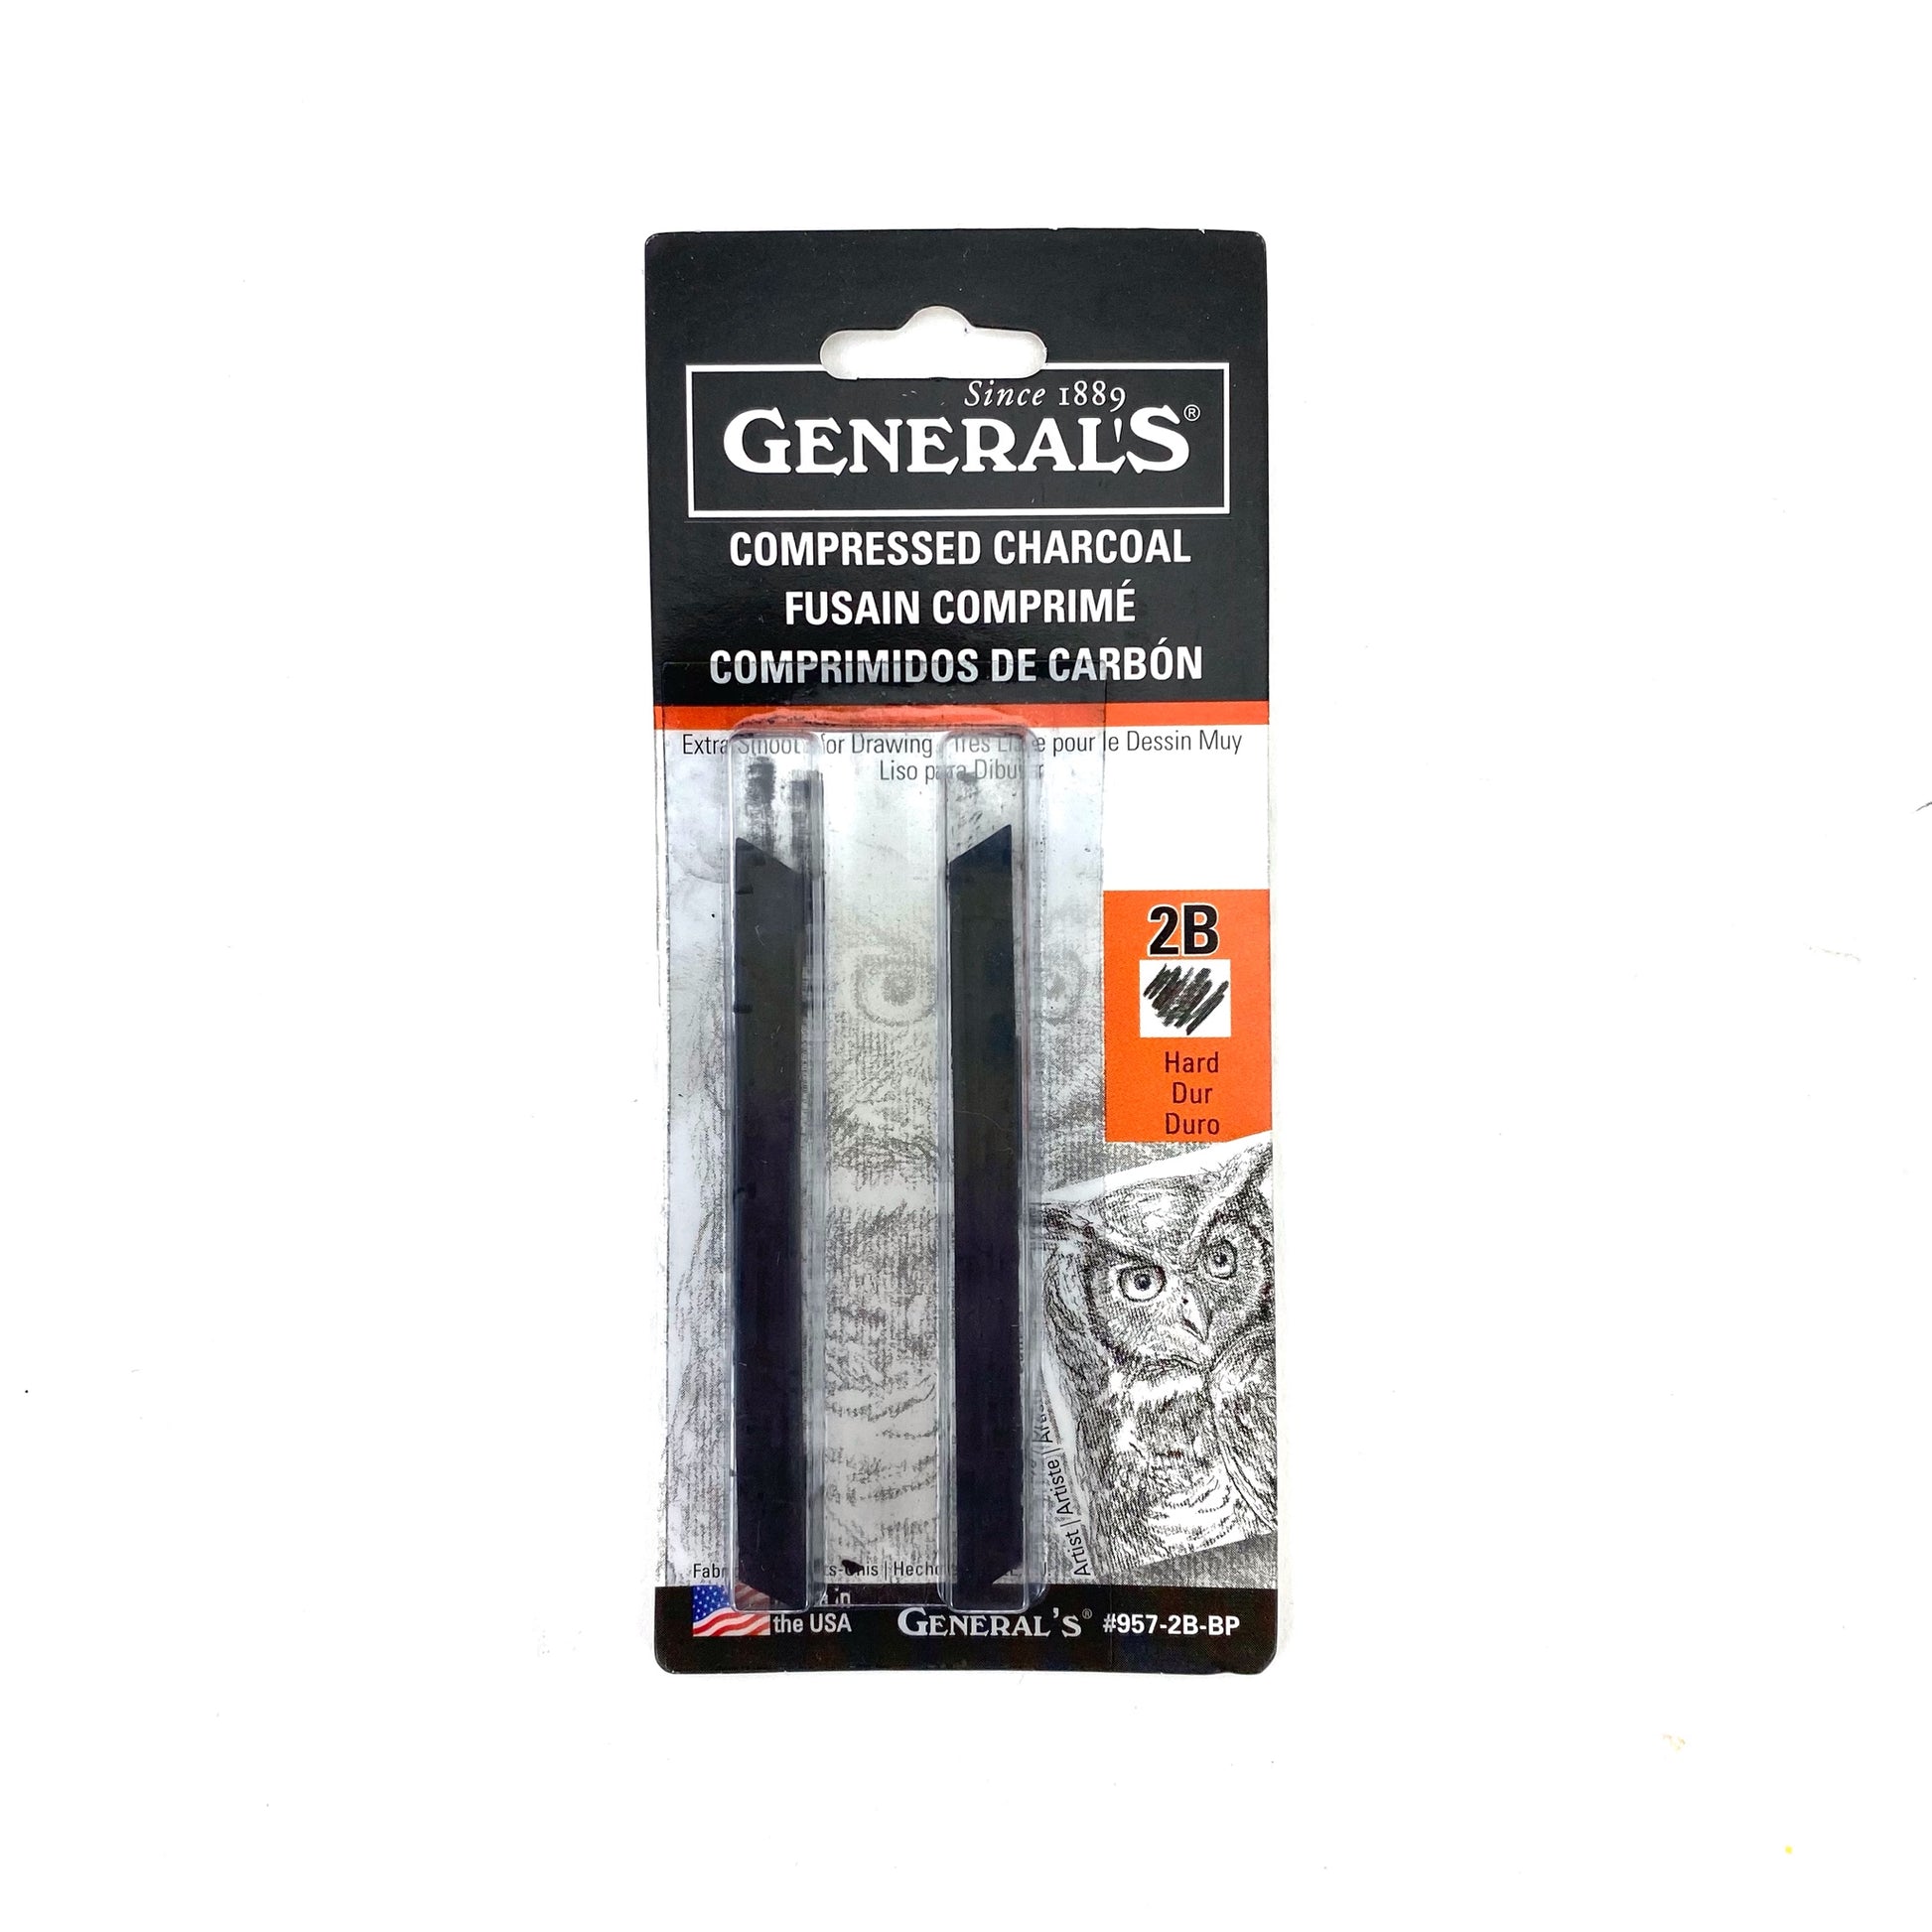 General's White Charcoal Sticks 958BP on sale at  $2.59